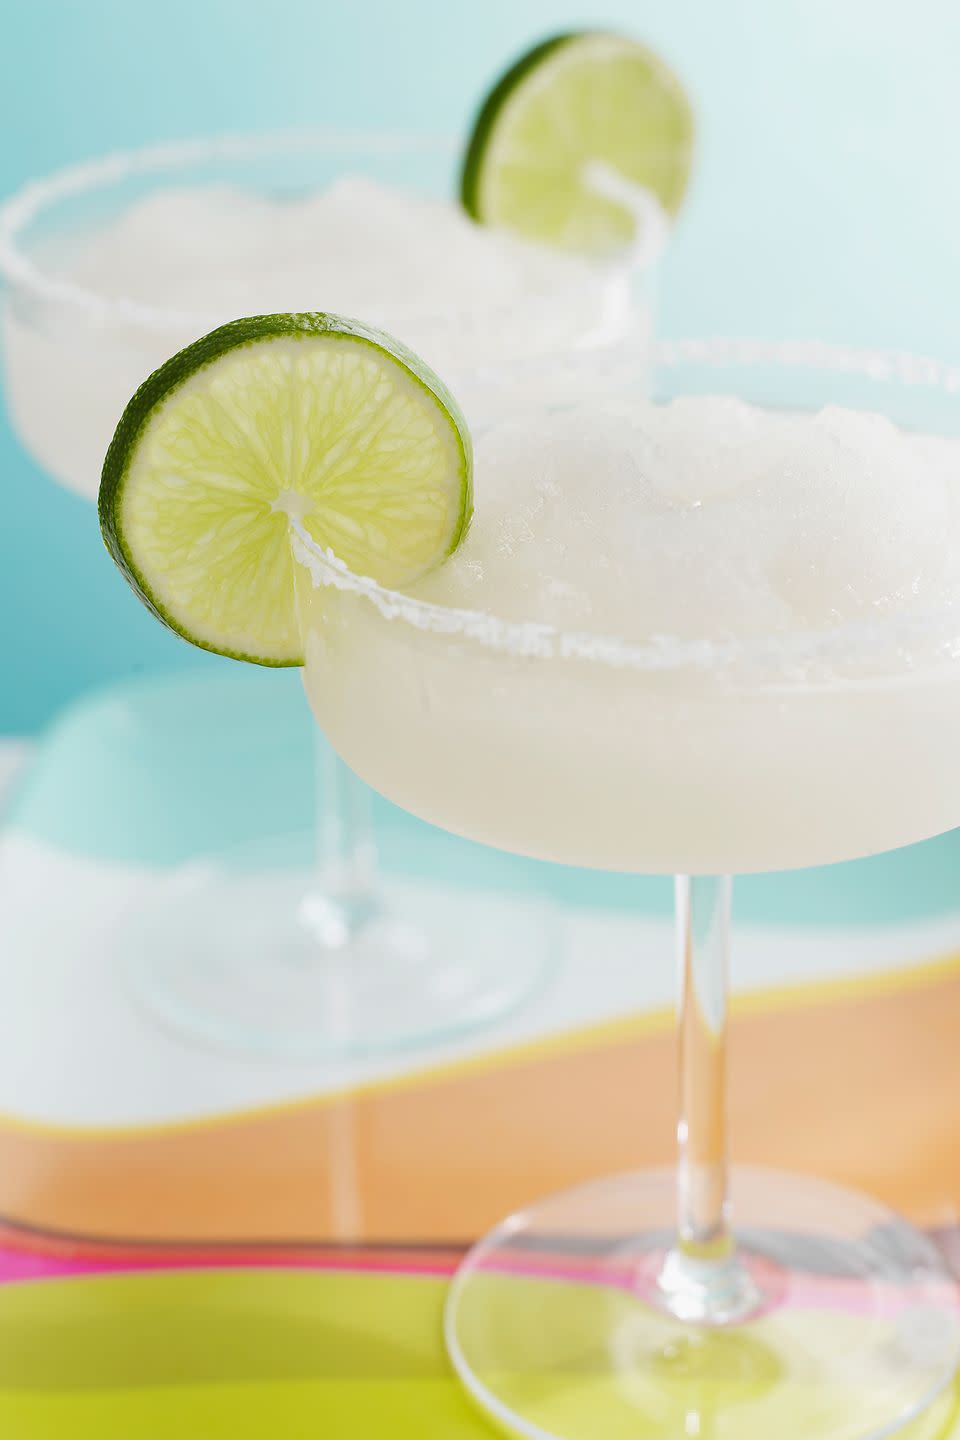 <p>"A margarita serves up a double whammy due to the dangerous duo of sugar AND salt." Says Dr Sam. "This leads to the puffy faced look we associate with a hangover, not to mention the other potentially ageing effects of sugar long-term".</p><p>There you have it... If life gives you limes, do <strong>not </strong>make margaritas.</p>